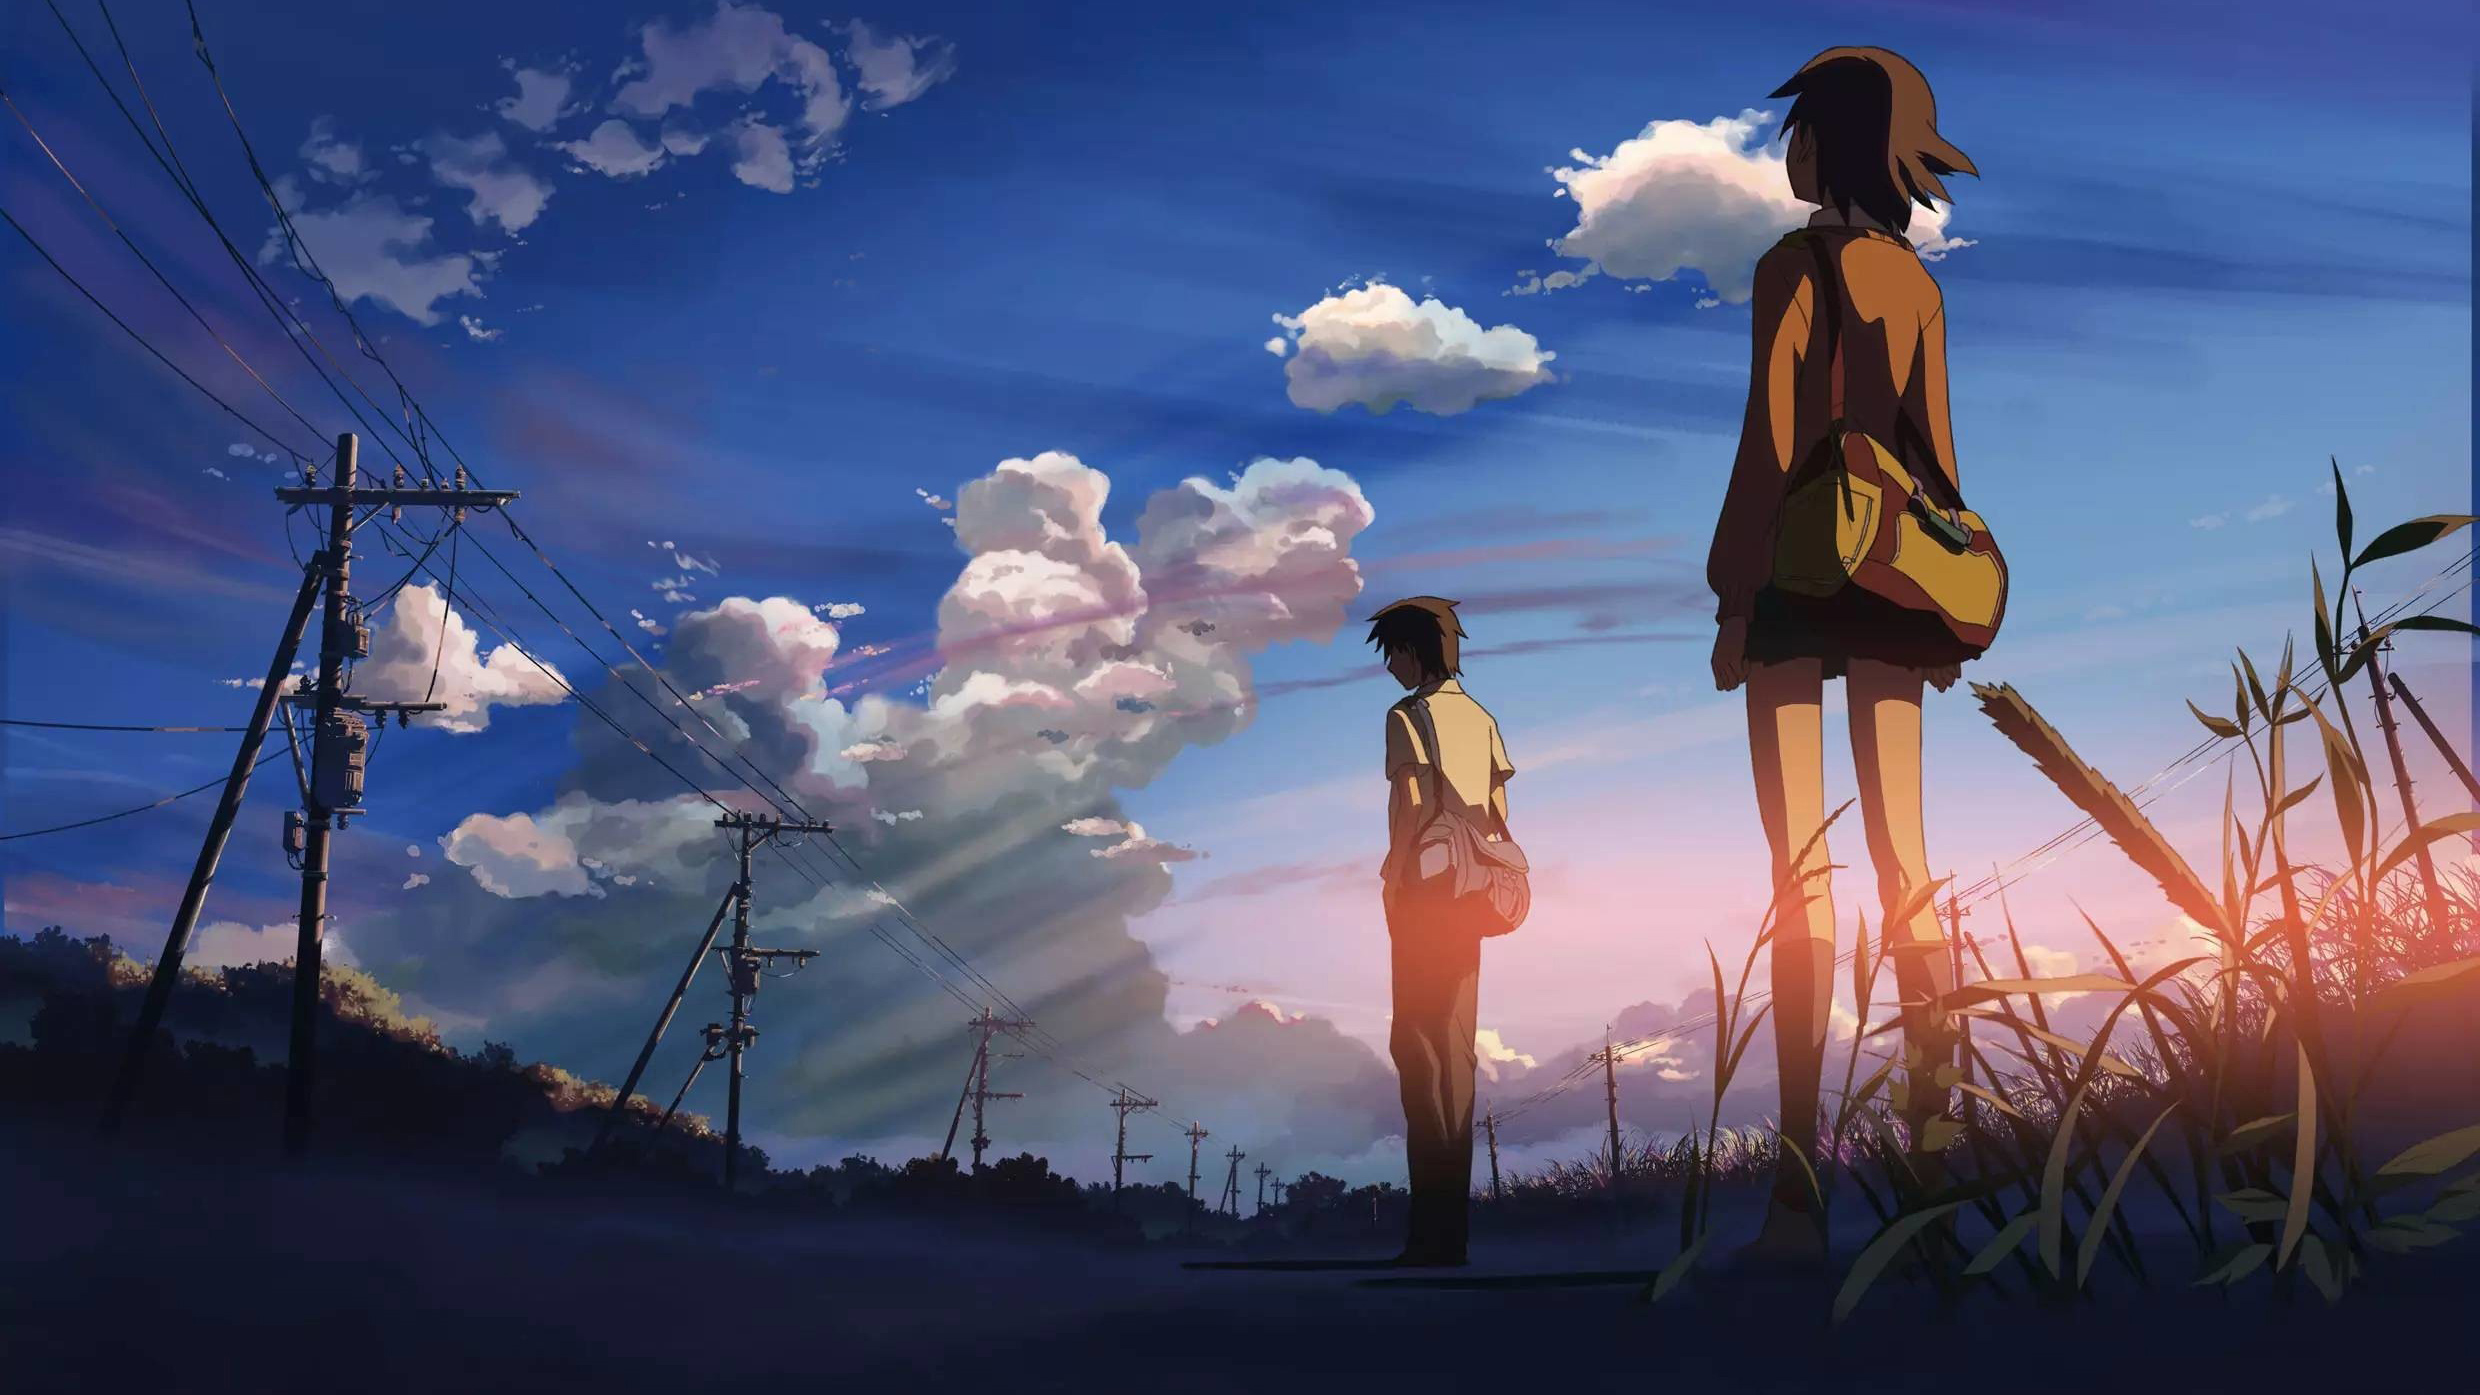 5 Centimeters Per Second 4k Wallpaper,HD Anime Wallpapers,4k Wallpapers ...